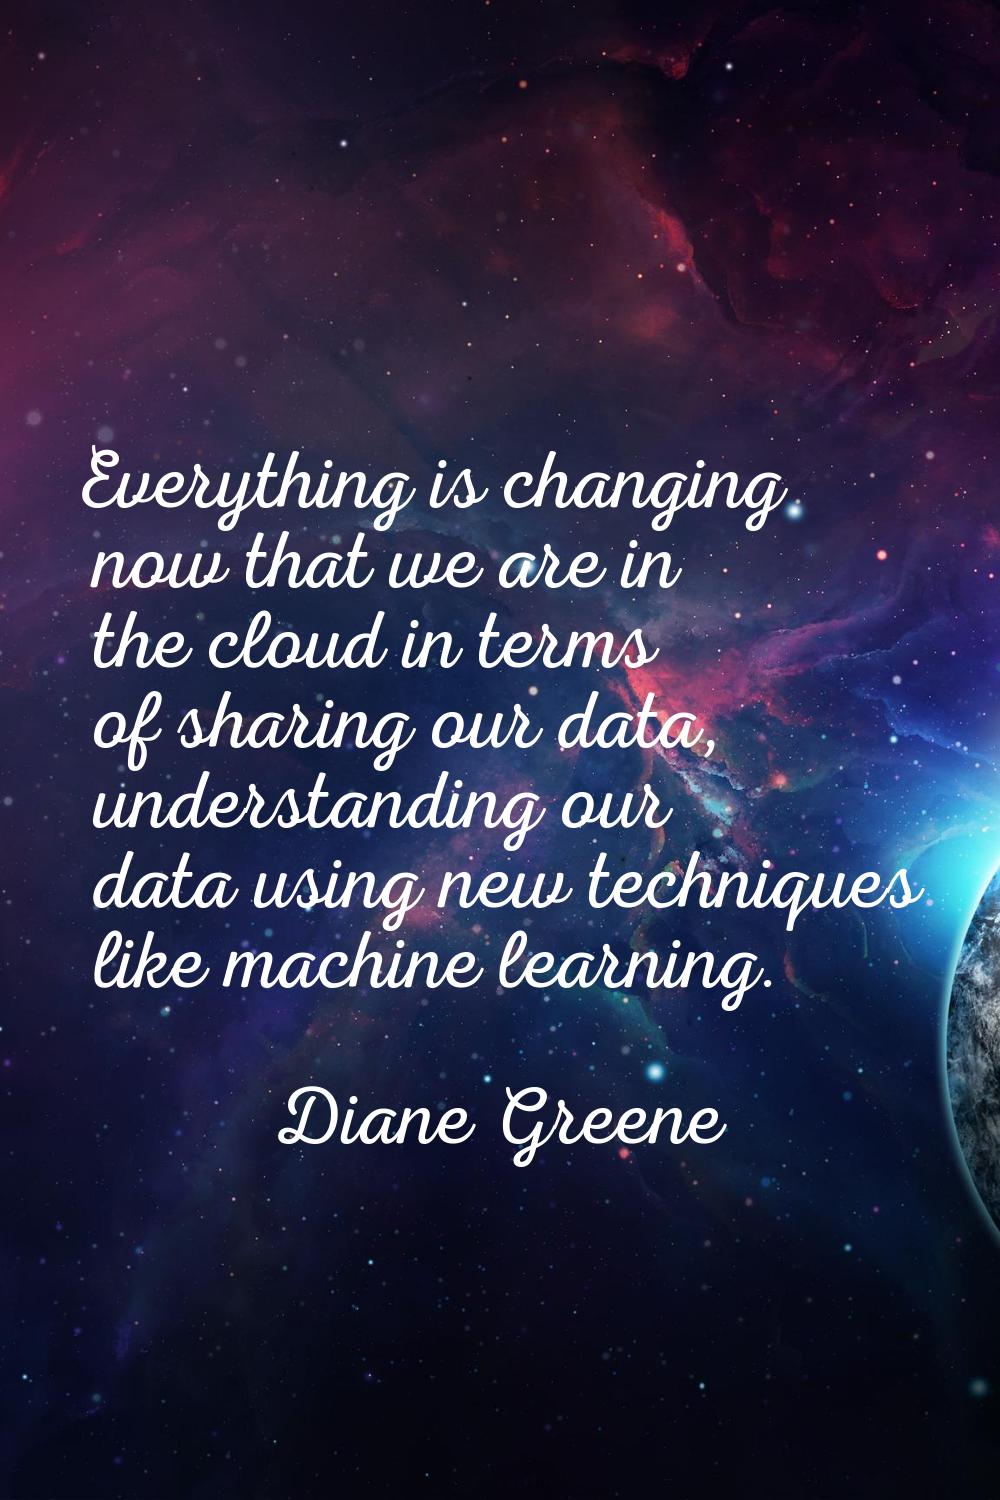 Everything is changing now that we are in the cloud in terms of sharing our data, understanding our